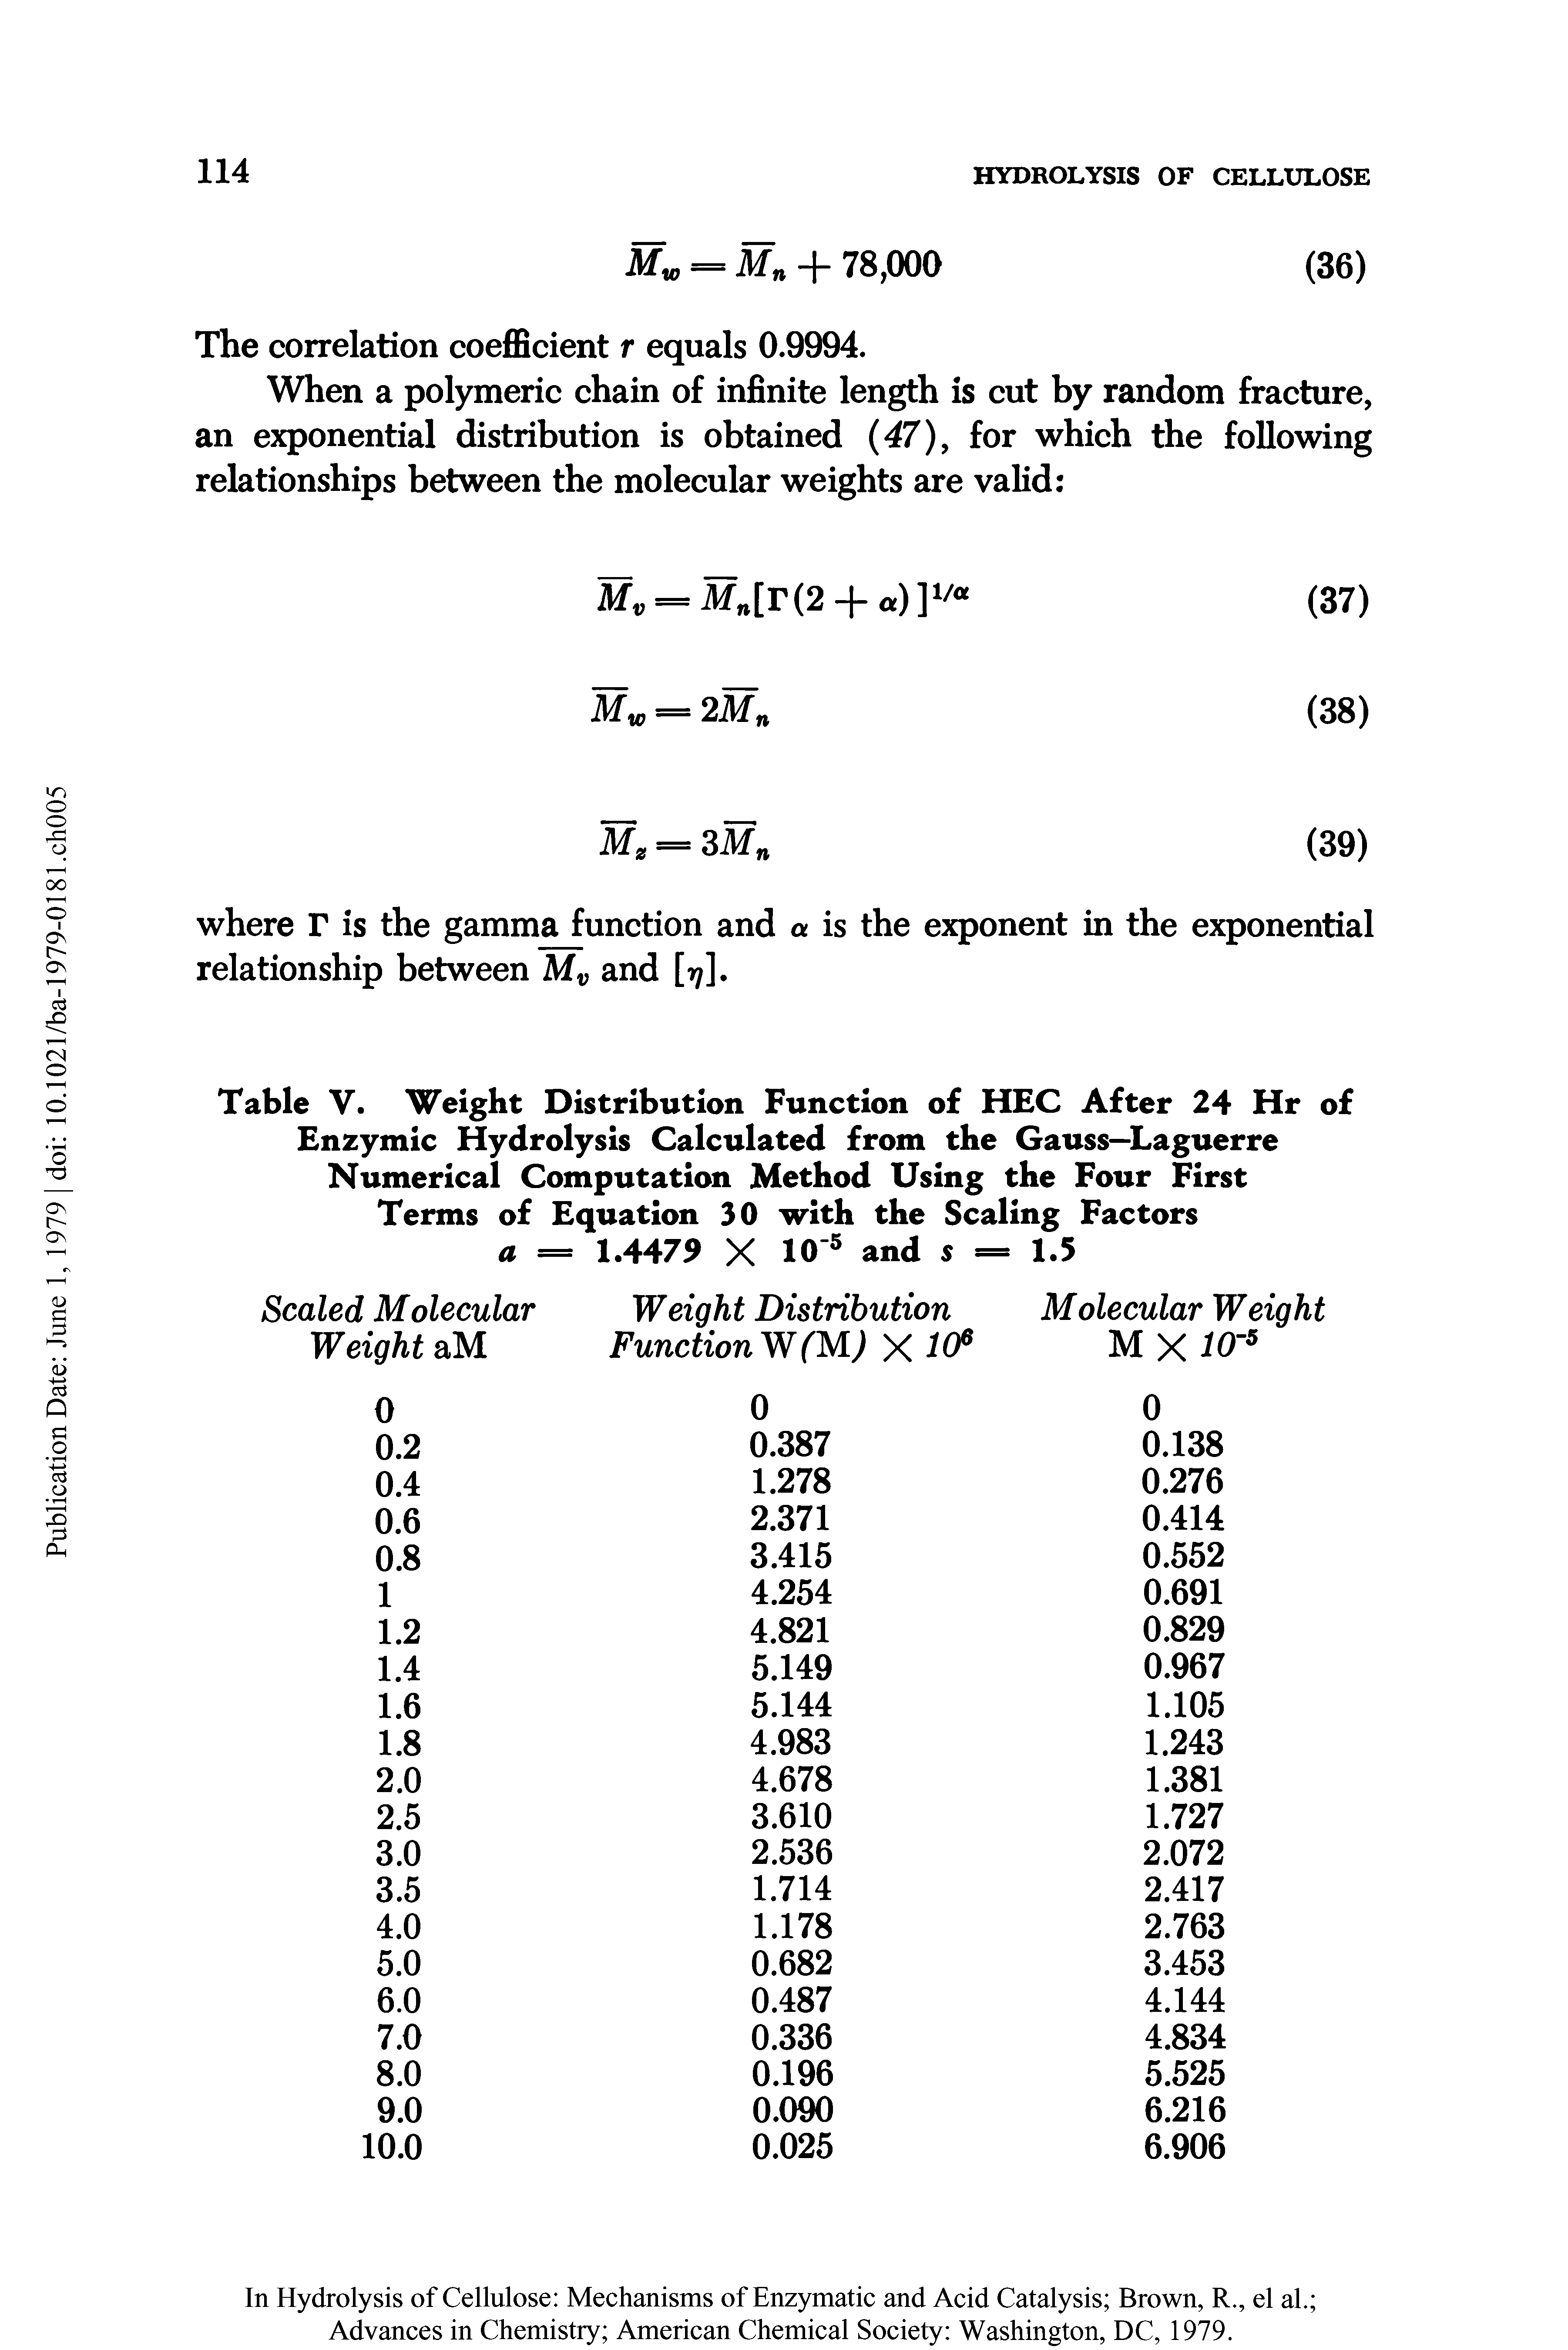 Table V. Weight Distribution Function of HEC After 24 Hr of Enzymic Hydrolysis Calculated from the Gauss—Laguerre Numerical Computation Method Using the Four First Terms of Equation 30 with the Scaling Factors...